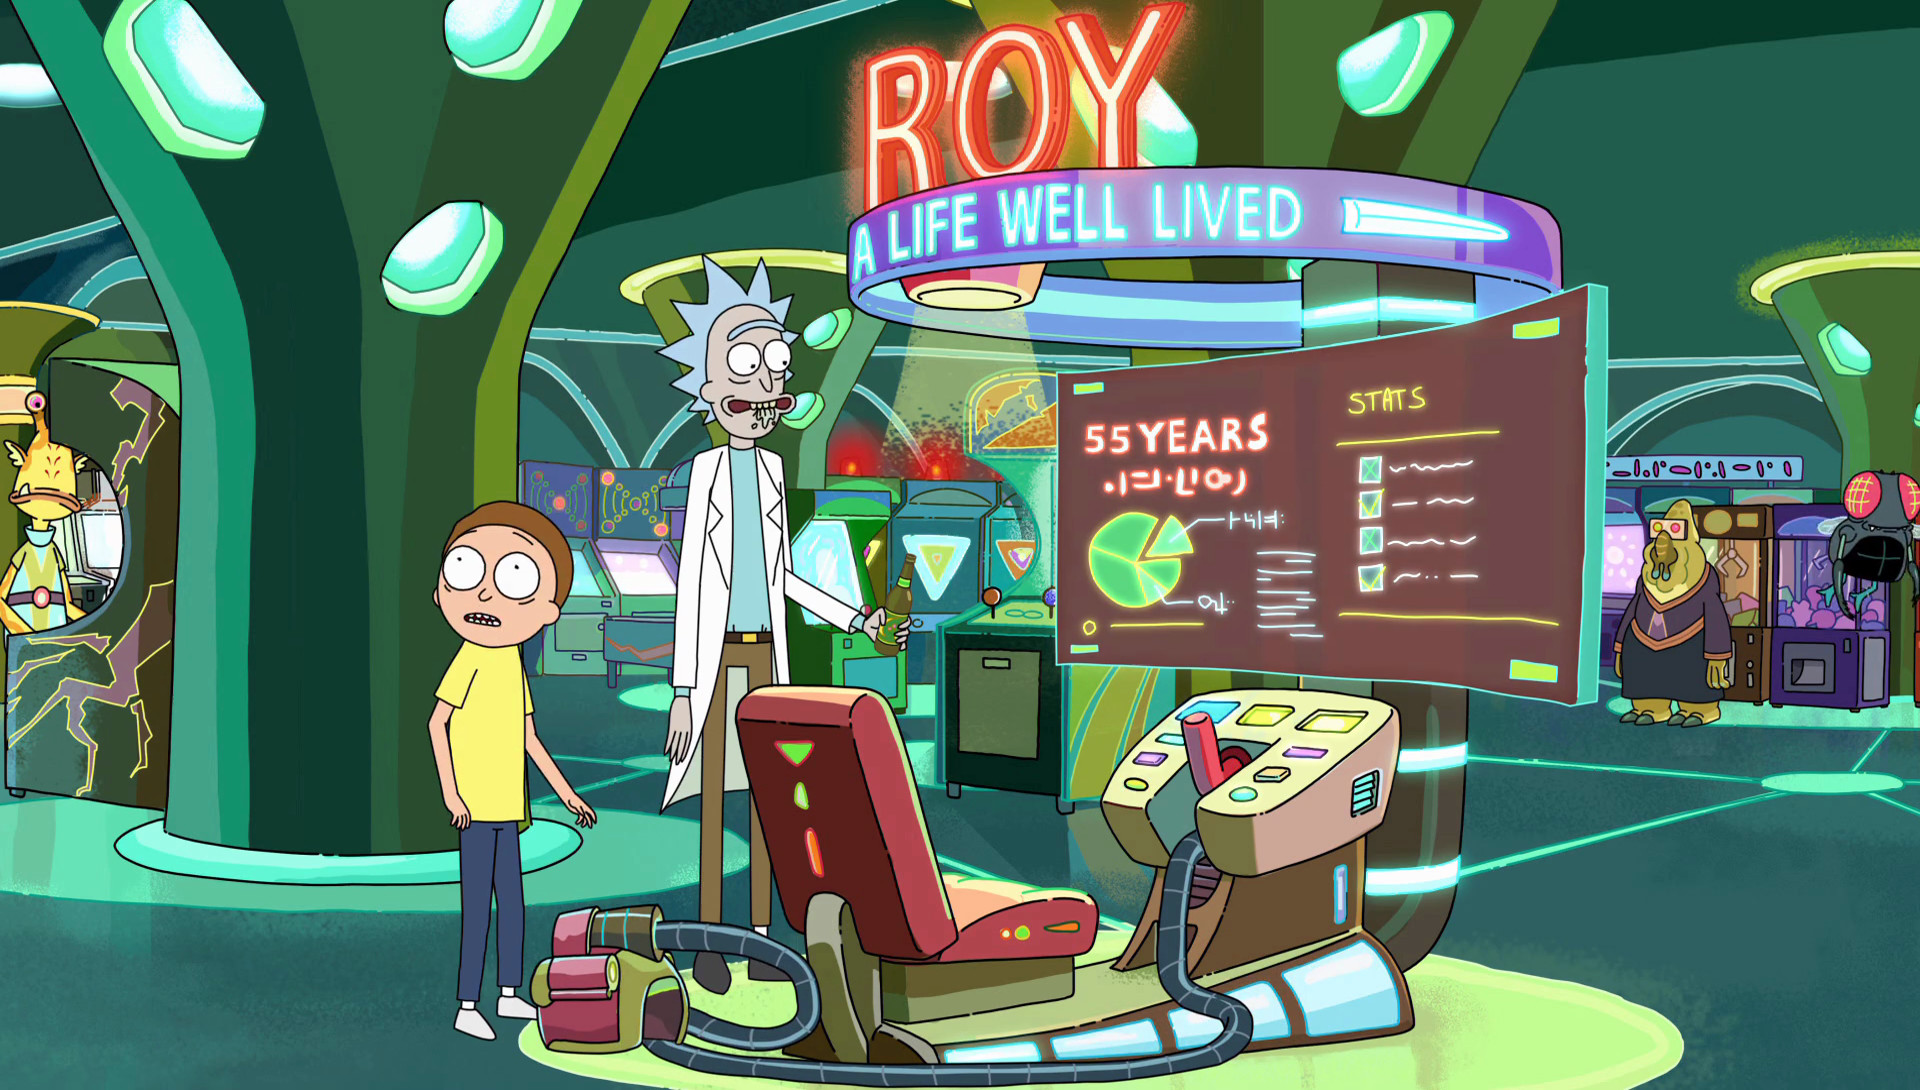 1920x1090 Roy: A Life Well Lived is a Virtual Reality Life Simulator, a game seen at  the Blips and Chitz arcade and is played by Rick and Morty in the episode  ...